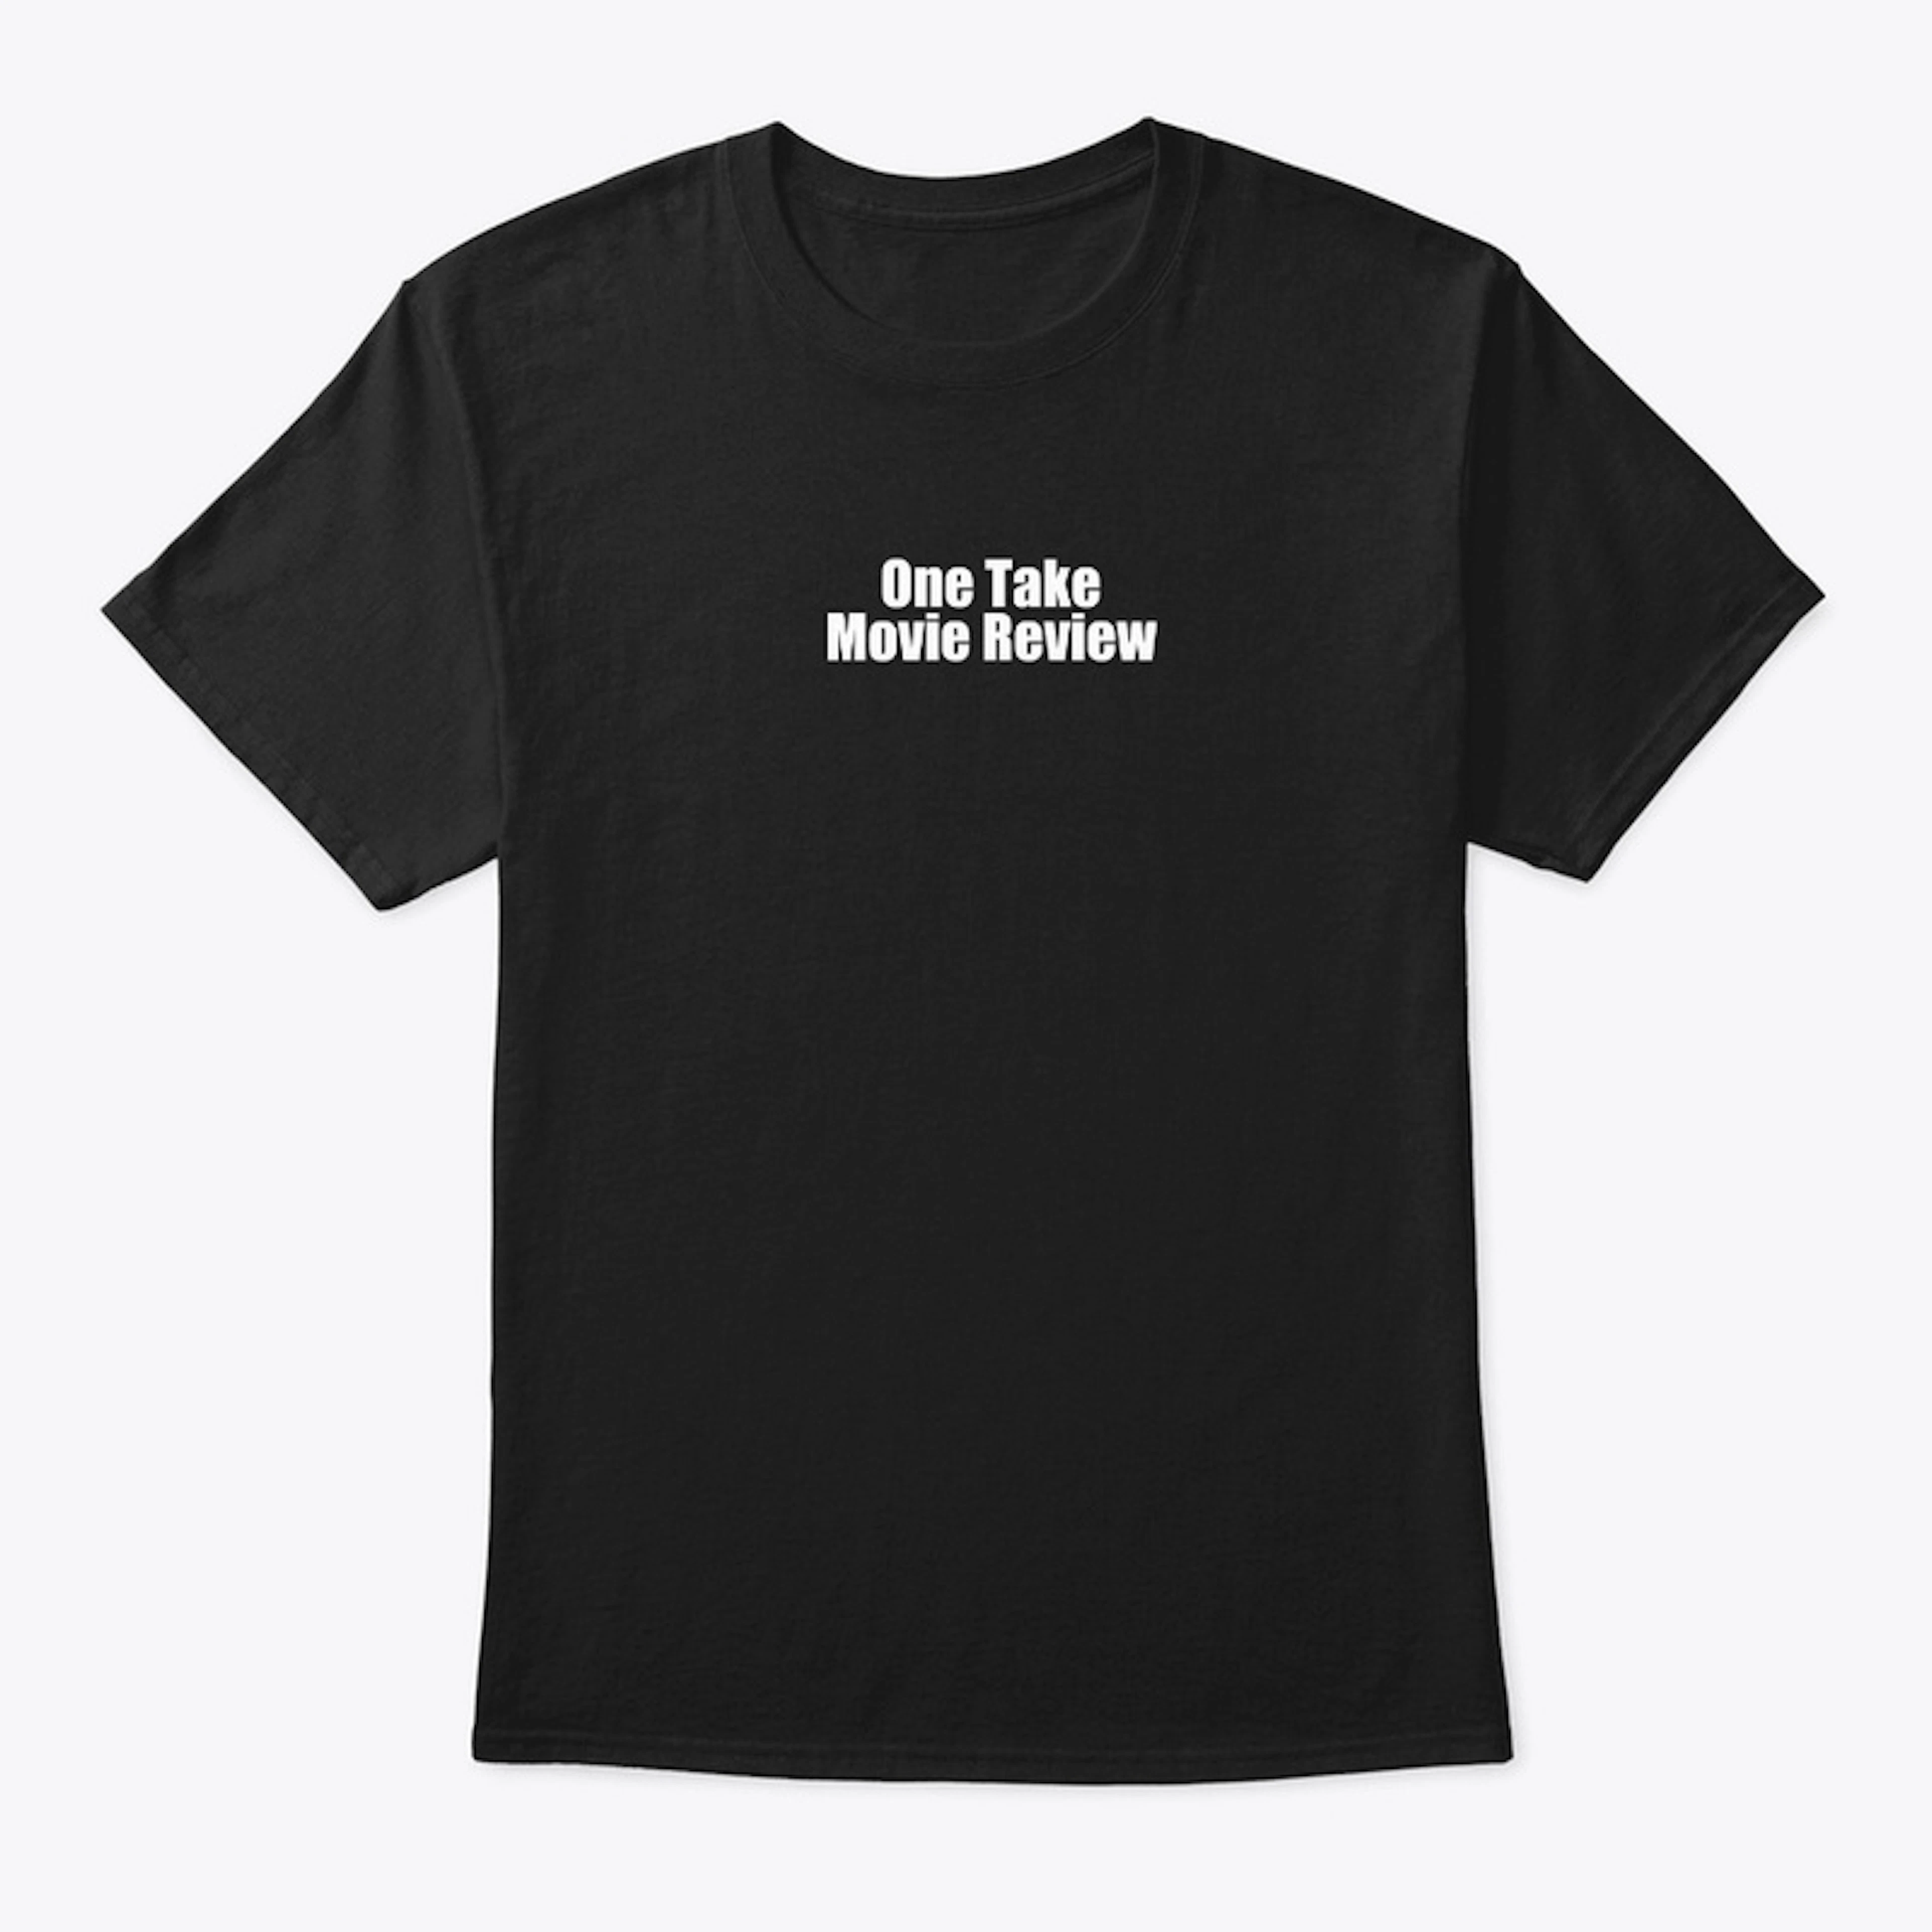 One Take Movie Review Tee